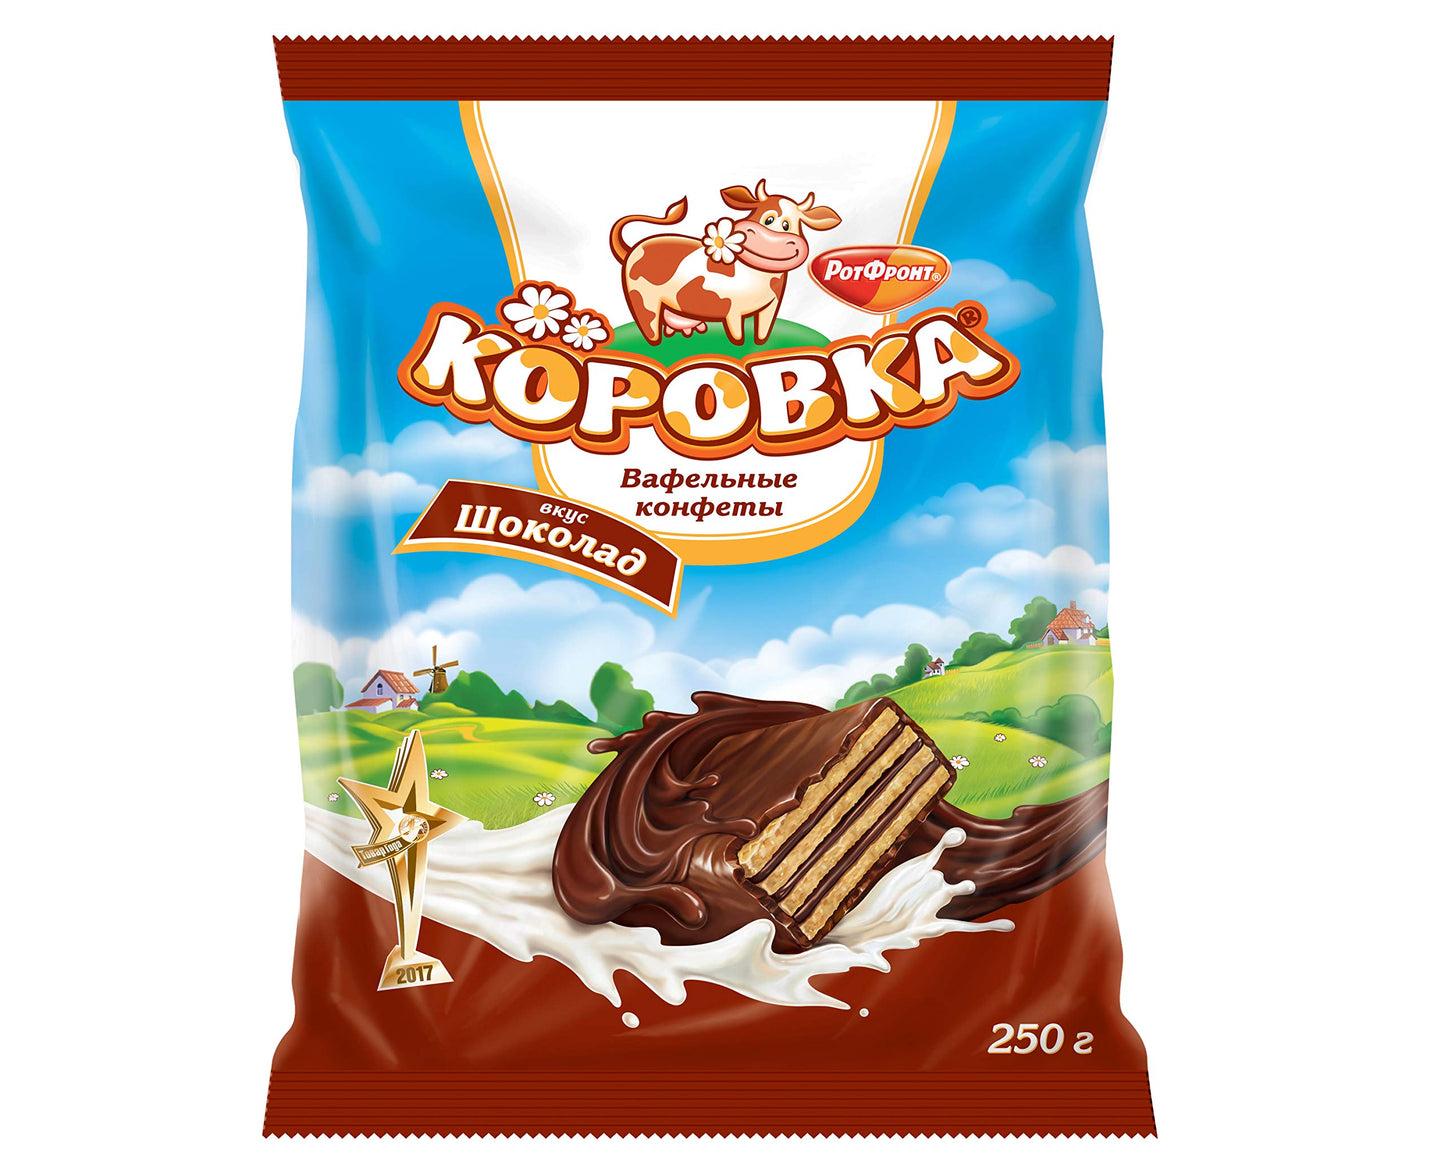 Korovka Chocolate Wafer Cookies with Chocolate Glaze in Individual Wraps 8.8oz/250g Gourmet Imported Russian Candy Sweets Bars, Tender Cocoa Cream Filling